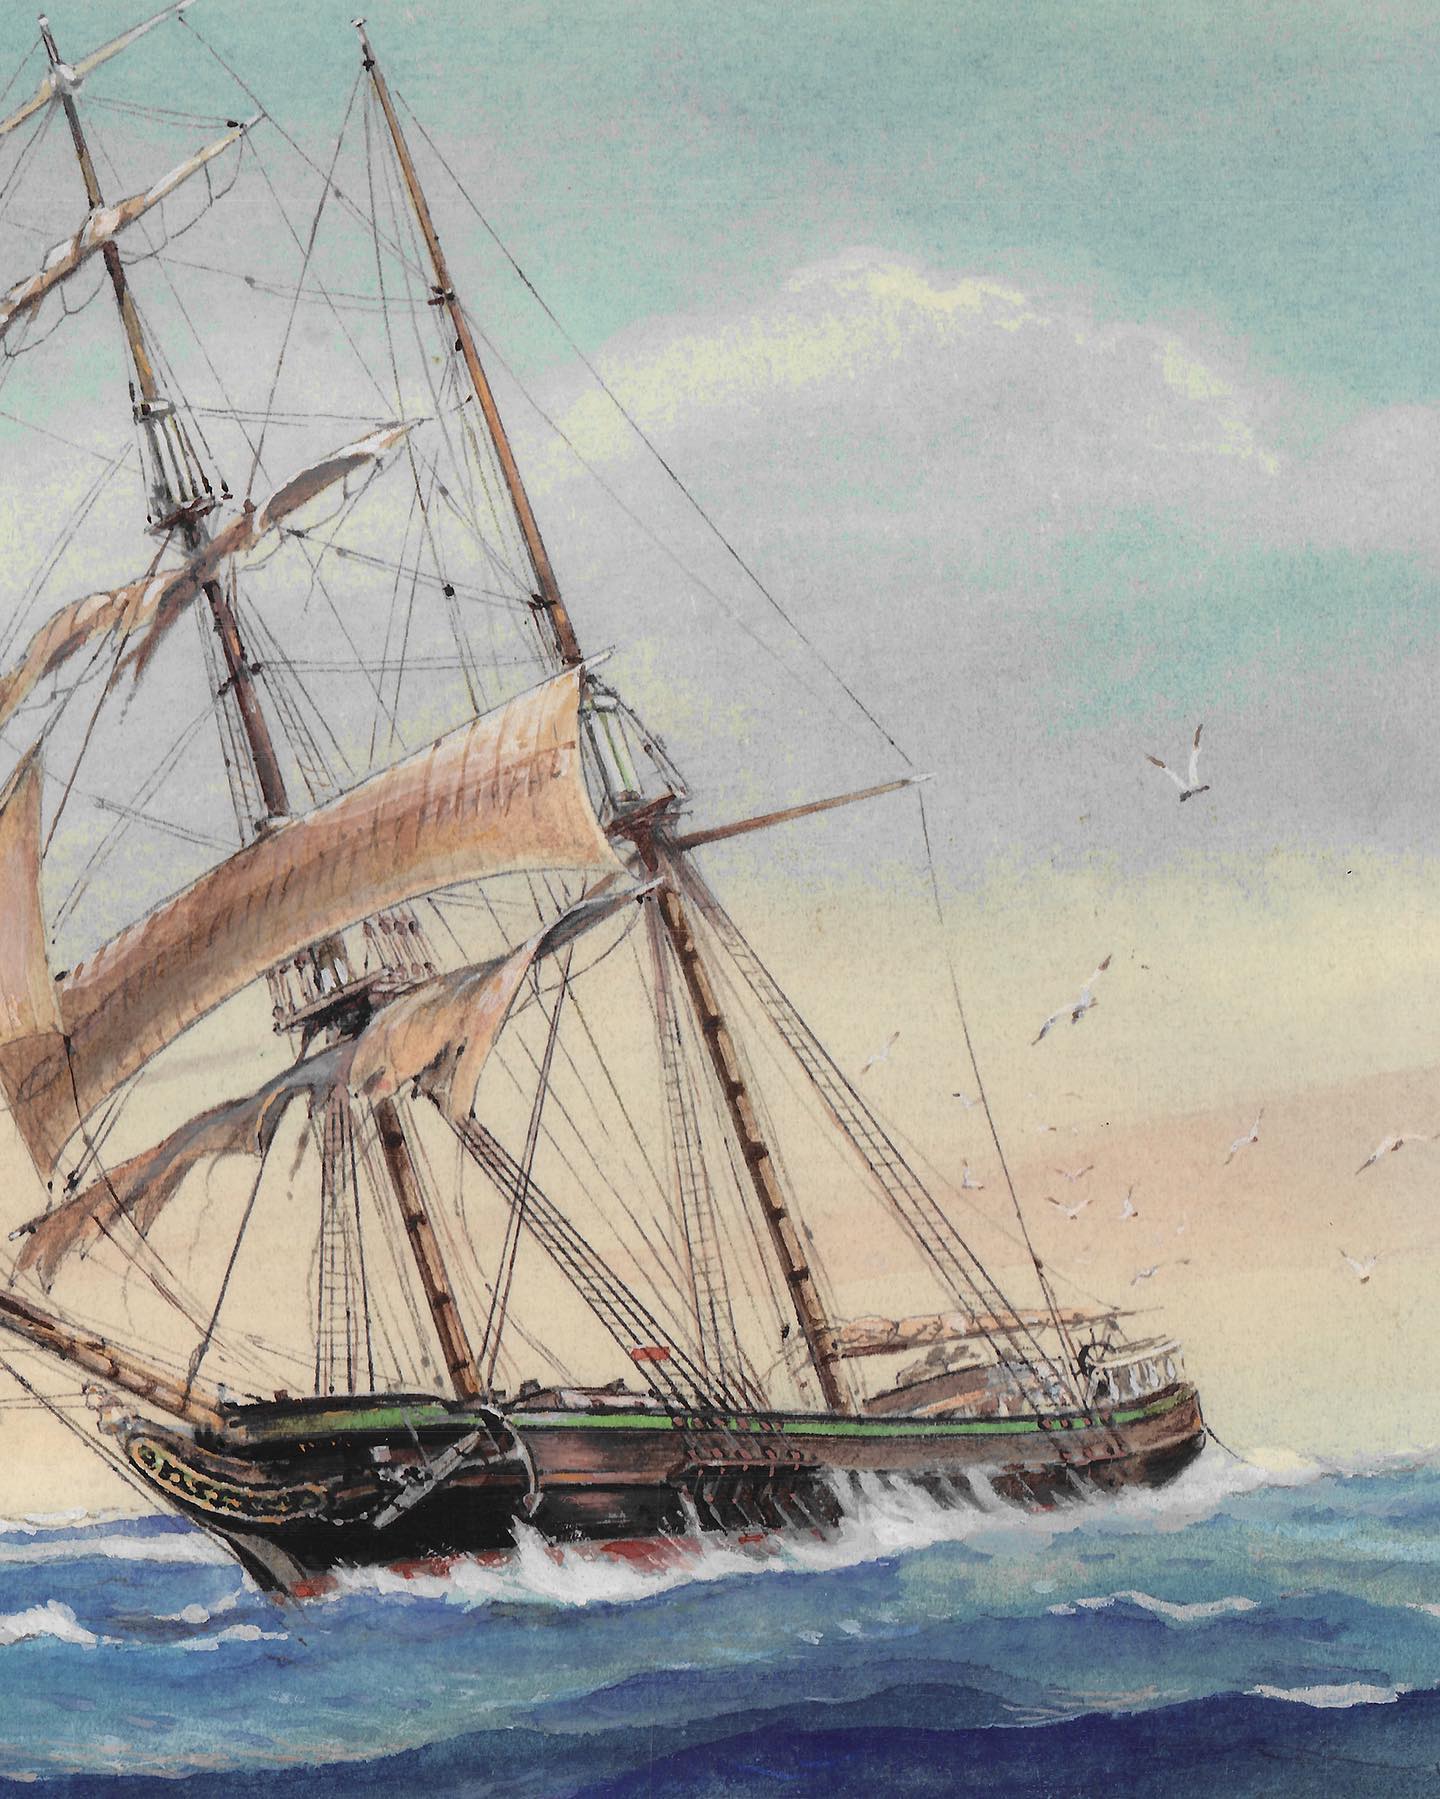 Merchant brigantine Mary Celeste. At first sight, this illustration by E. W. Wojschwillo does not seem specially creepy. It nevertheless shows a scene of one of the greatest mysteries in maritime history: the fate of the Crew of the Mary Celeste.